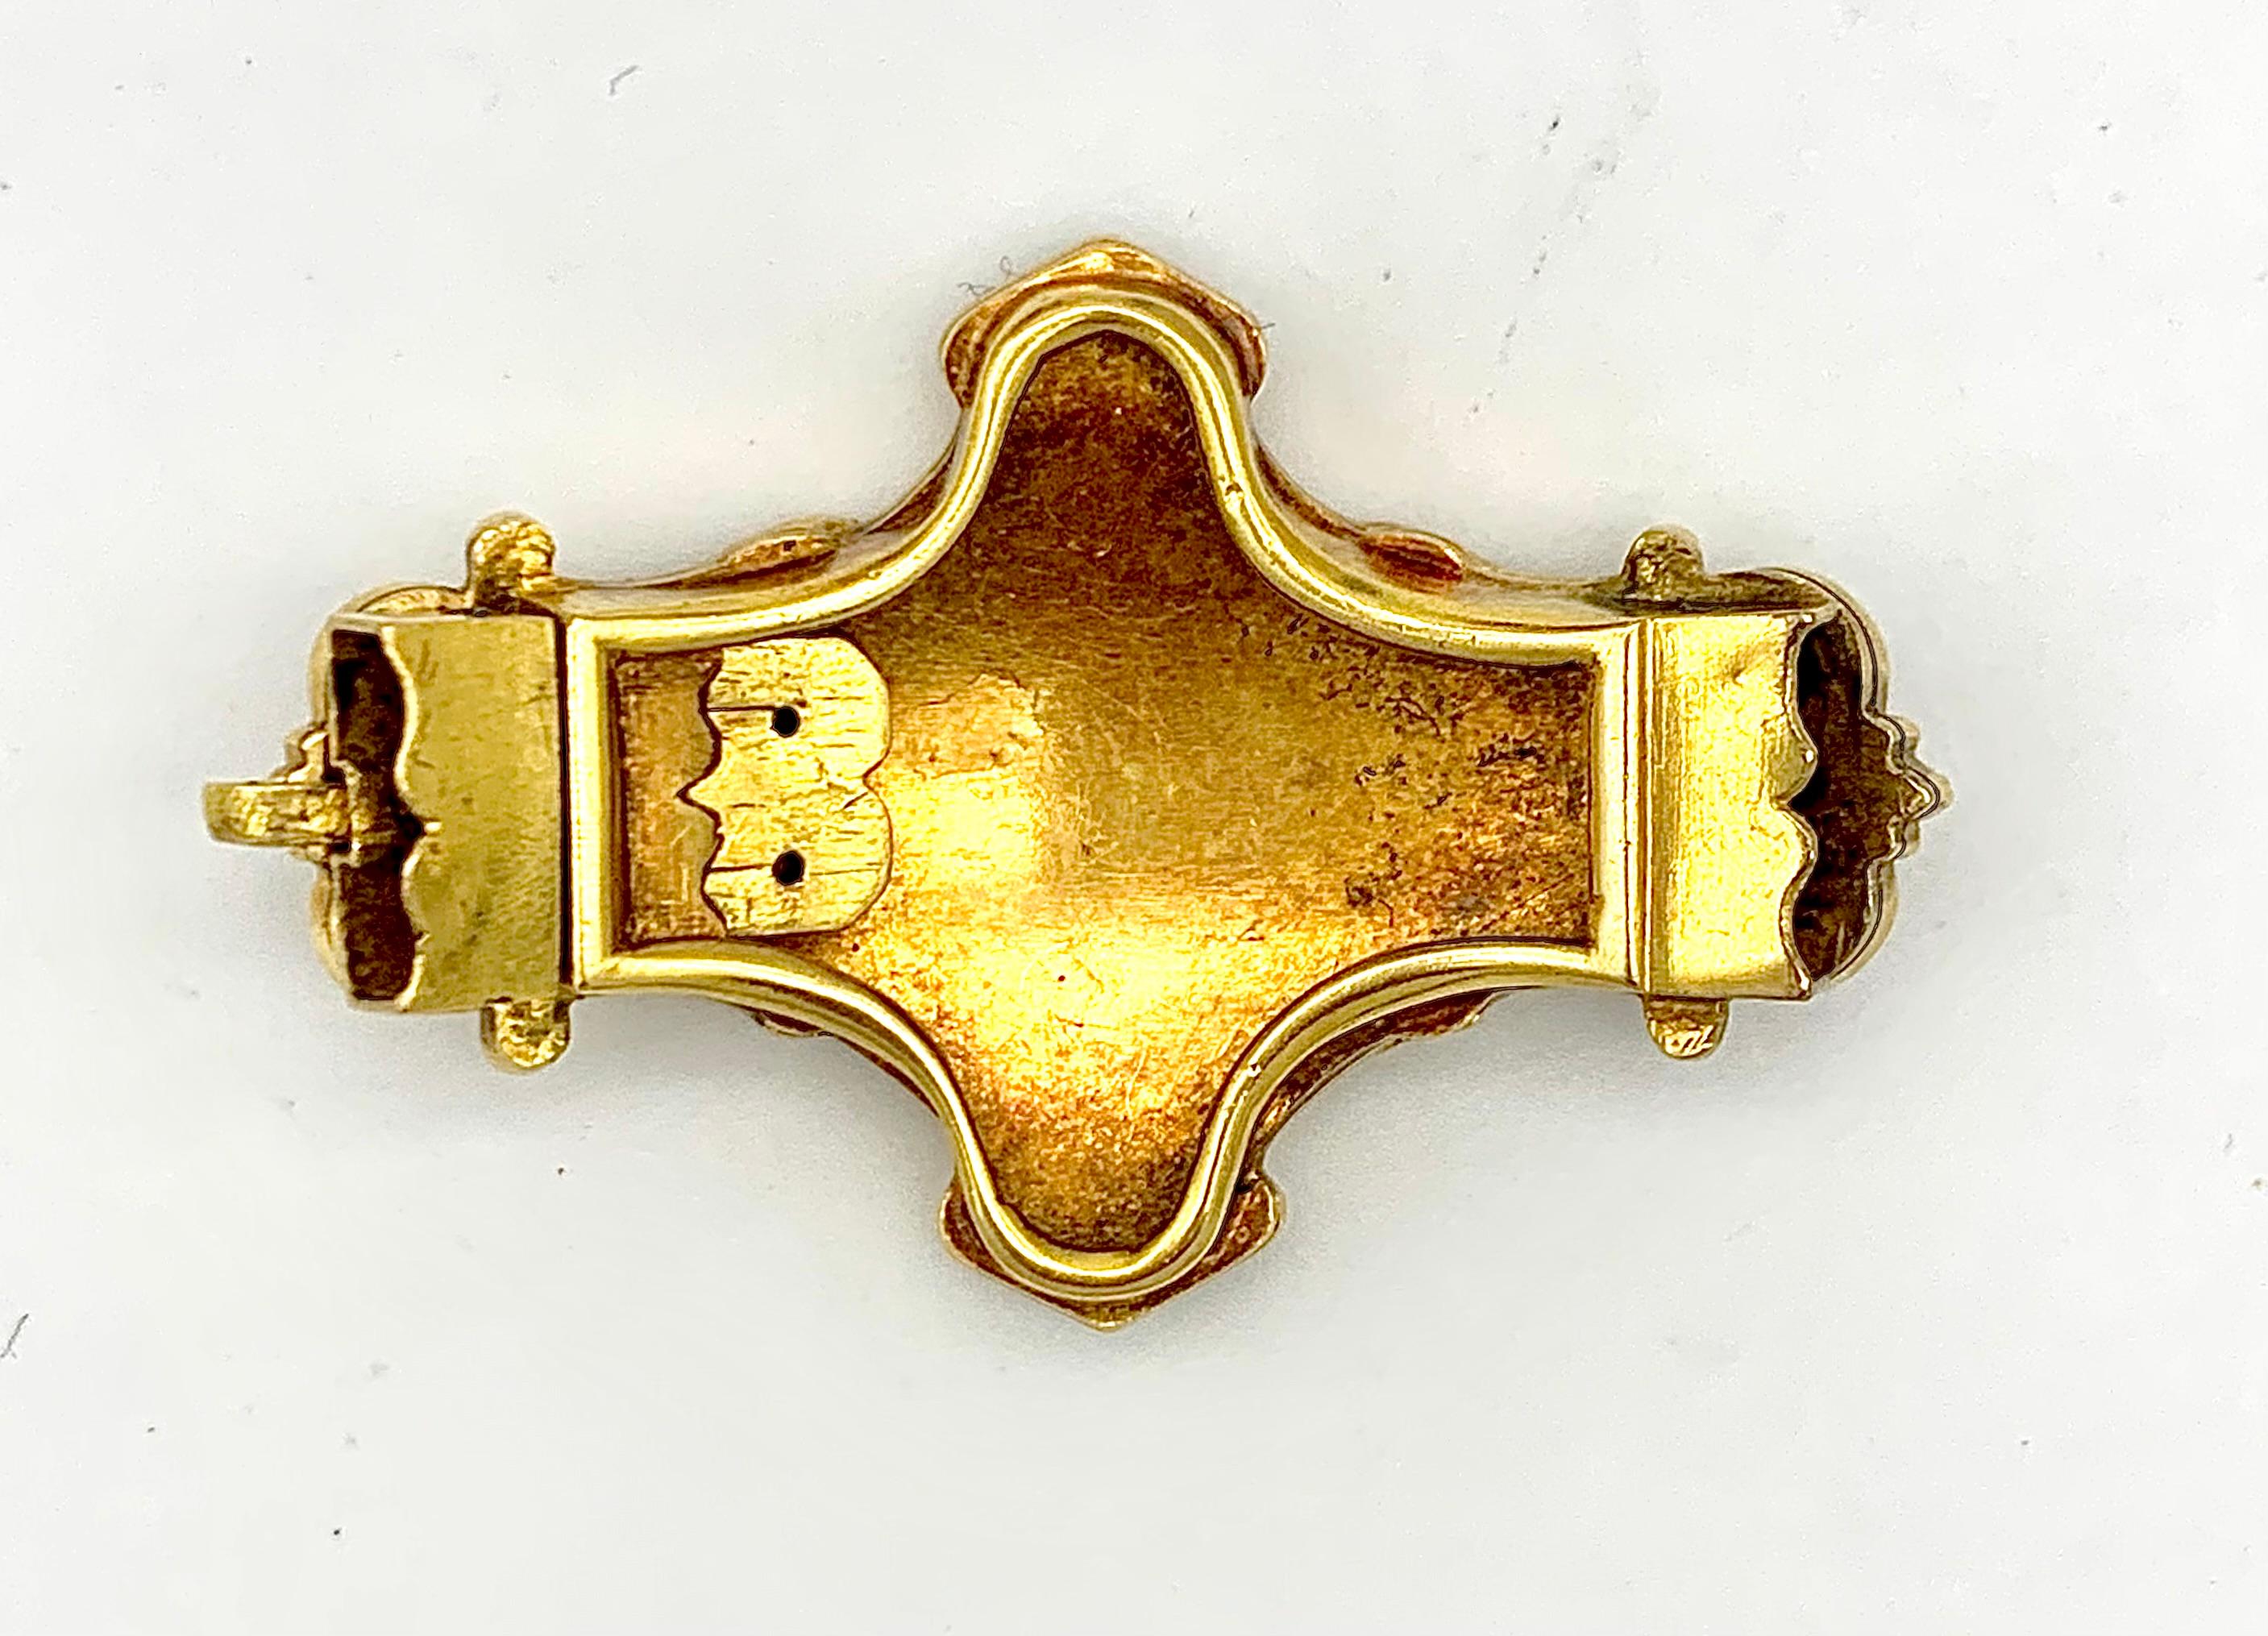 This solid gold clasp is decorated with fine bright royal blue guilloché enamel within a gold mount of rocaille and accanthus foliage.